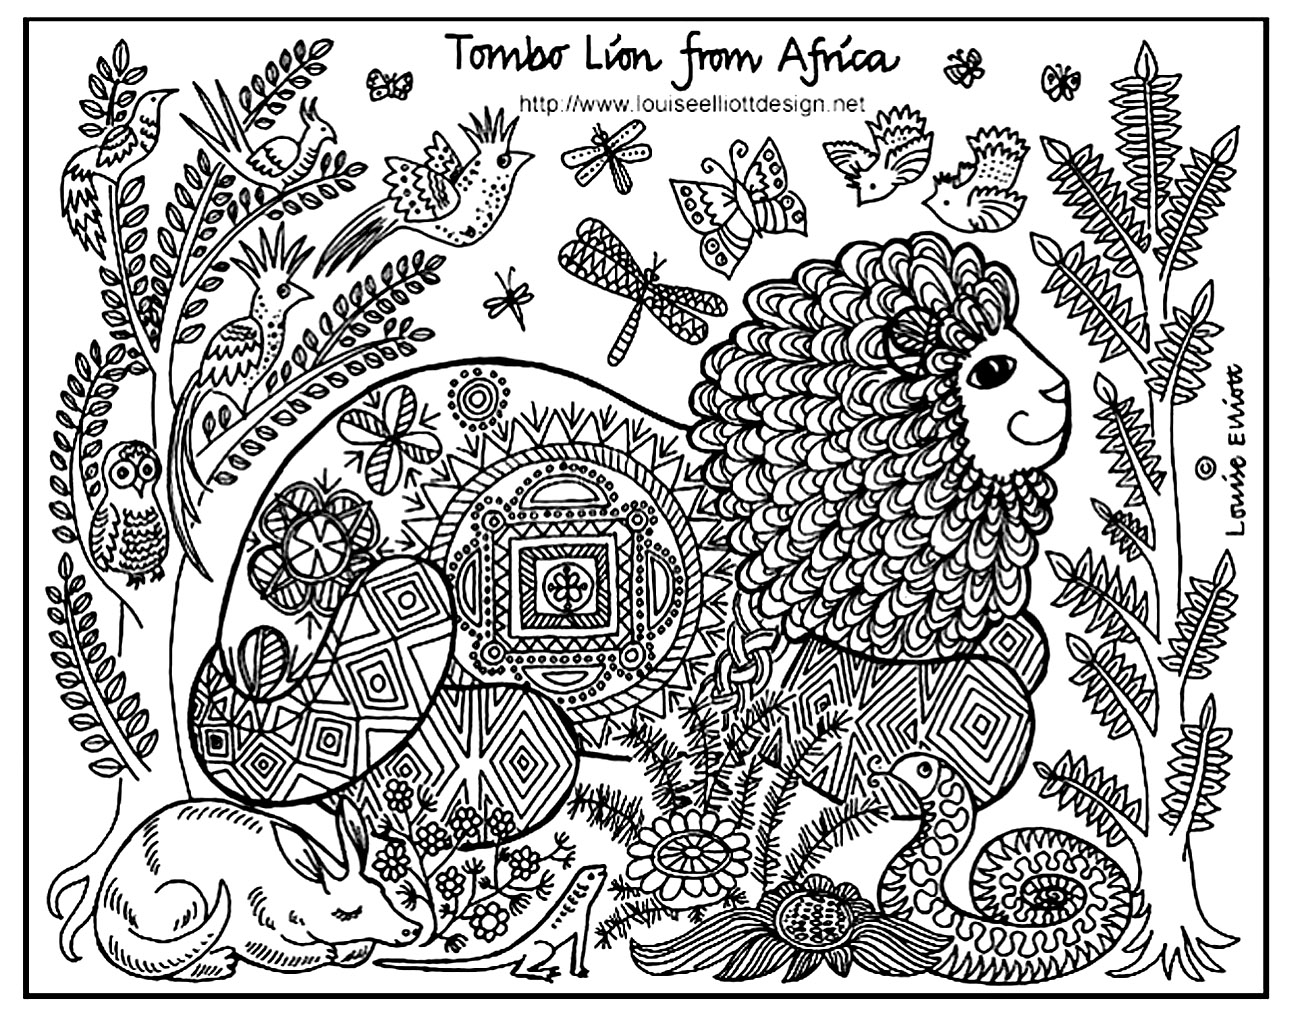 Engraving of a lion